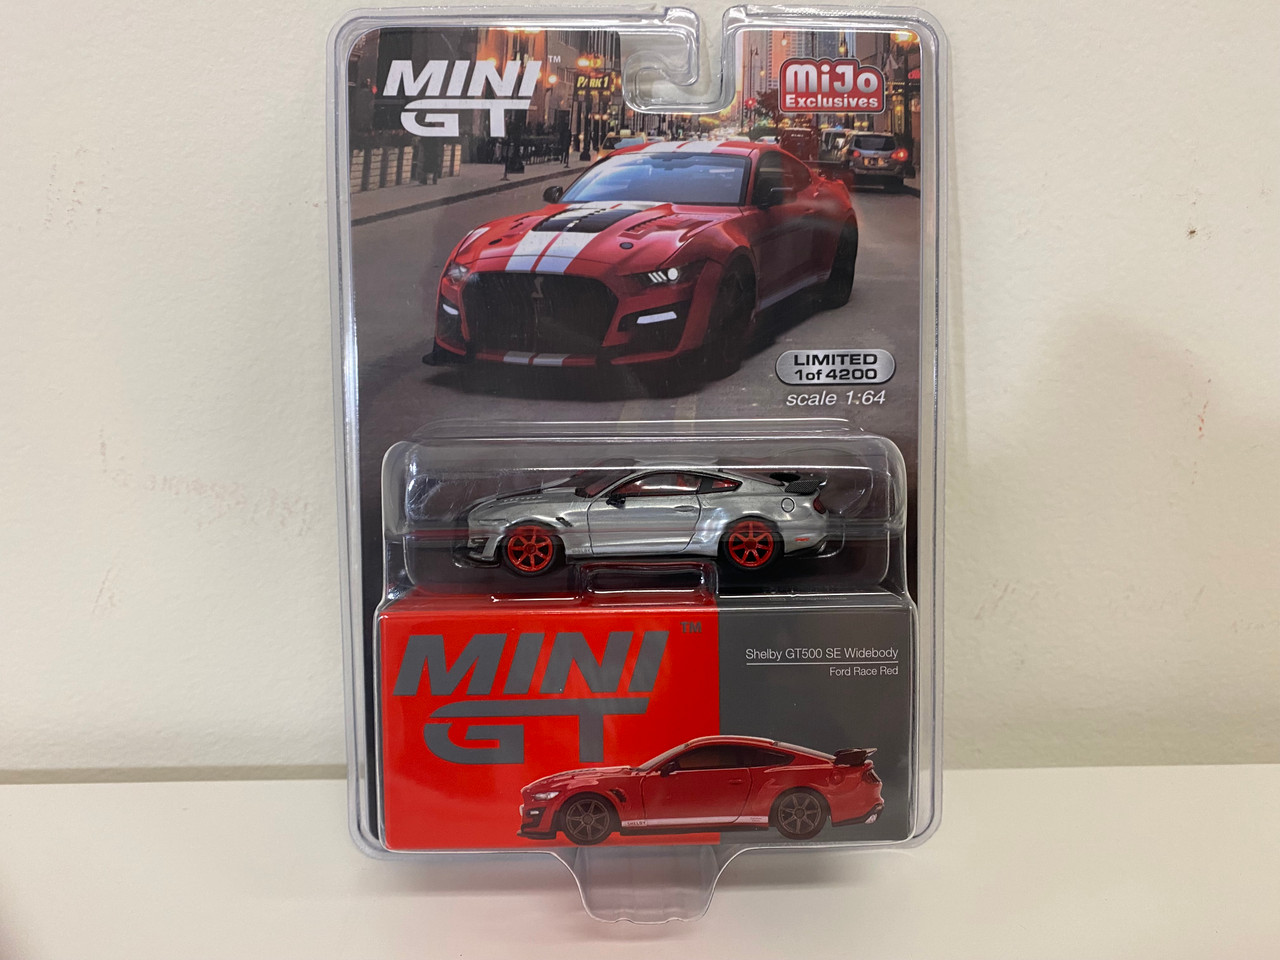 CHASE 1/64 Mini GT Ford Shelby GT500 SE Widebody (Silver with Red Wheels) Diecast Car Model